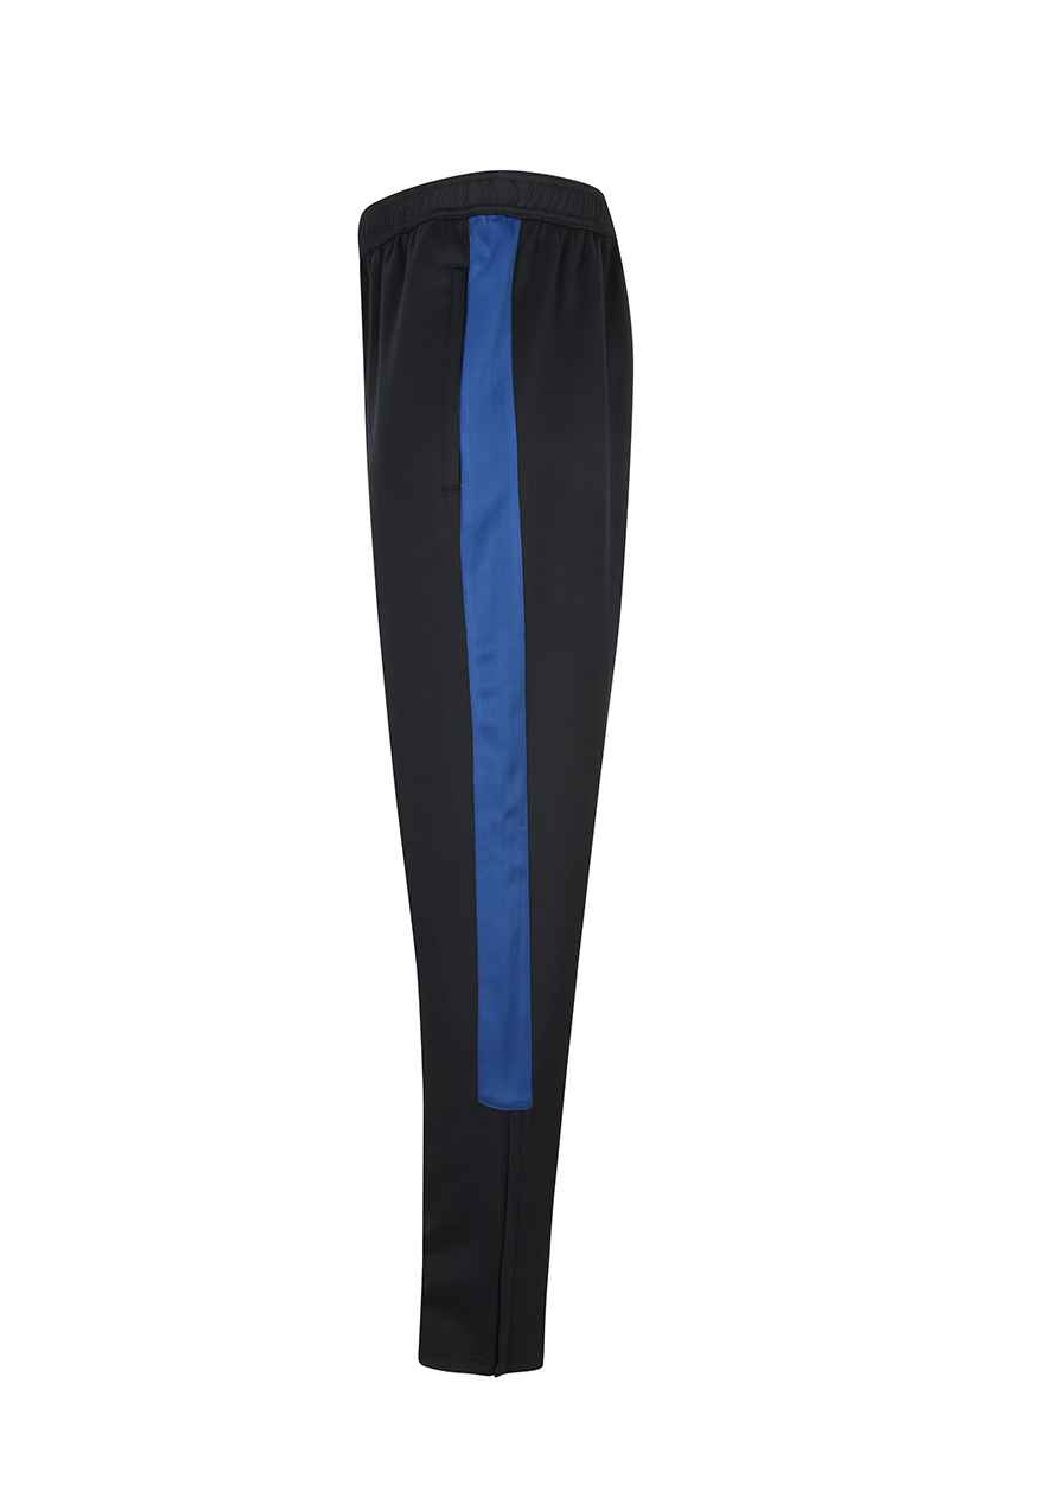 Black / Royal blue tracksuit bottoms - Undisputed Sports